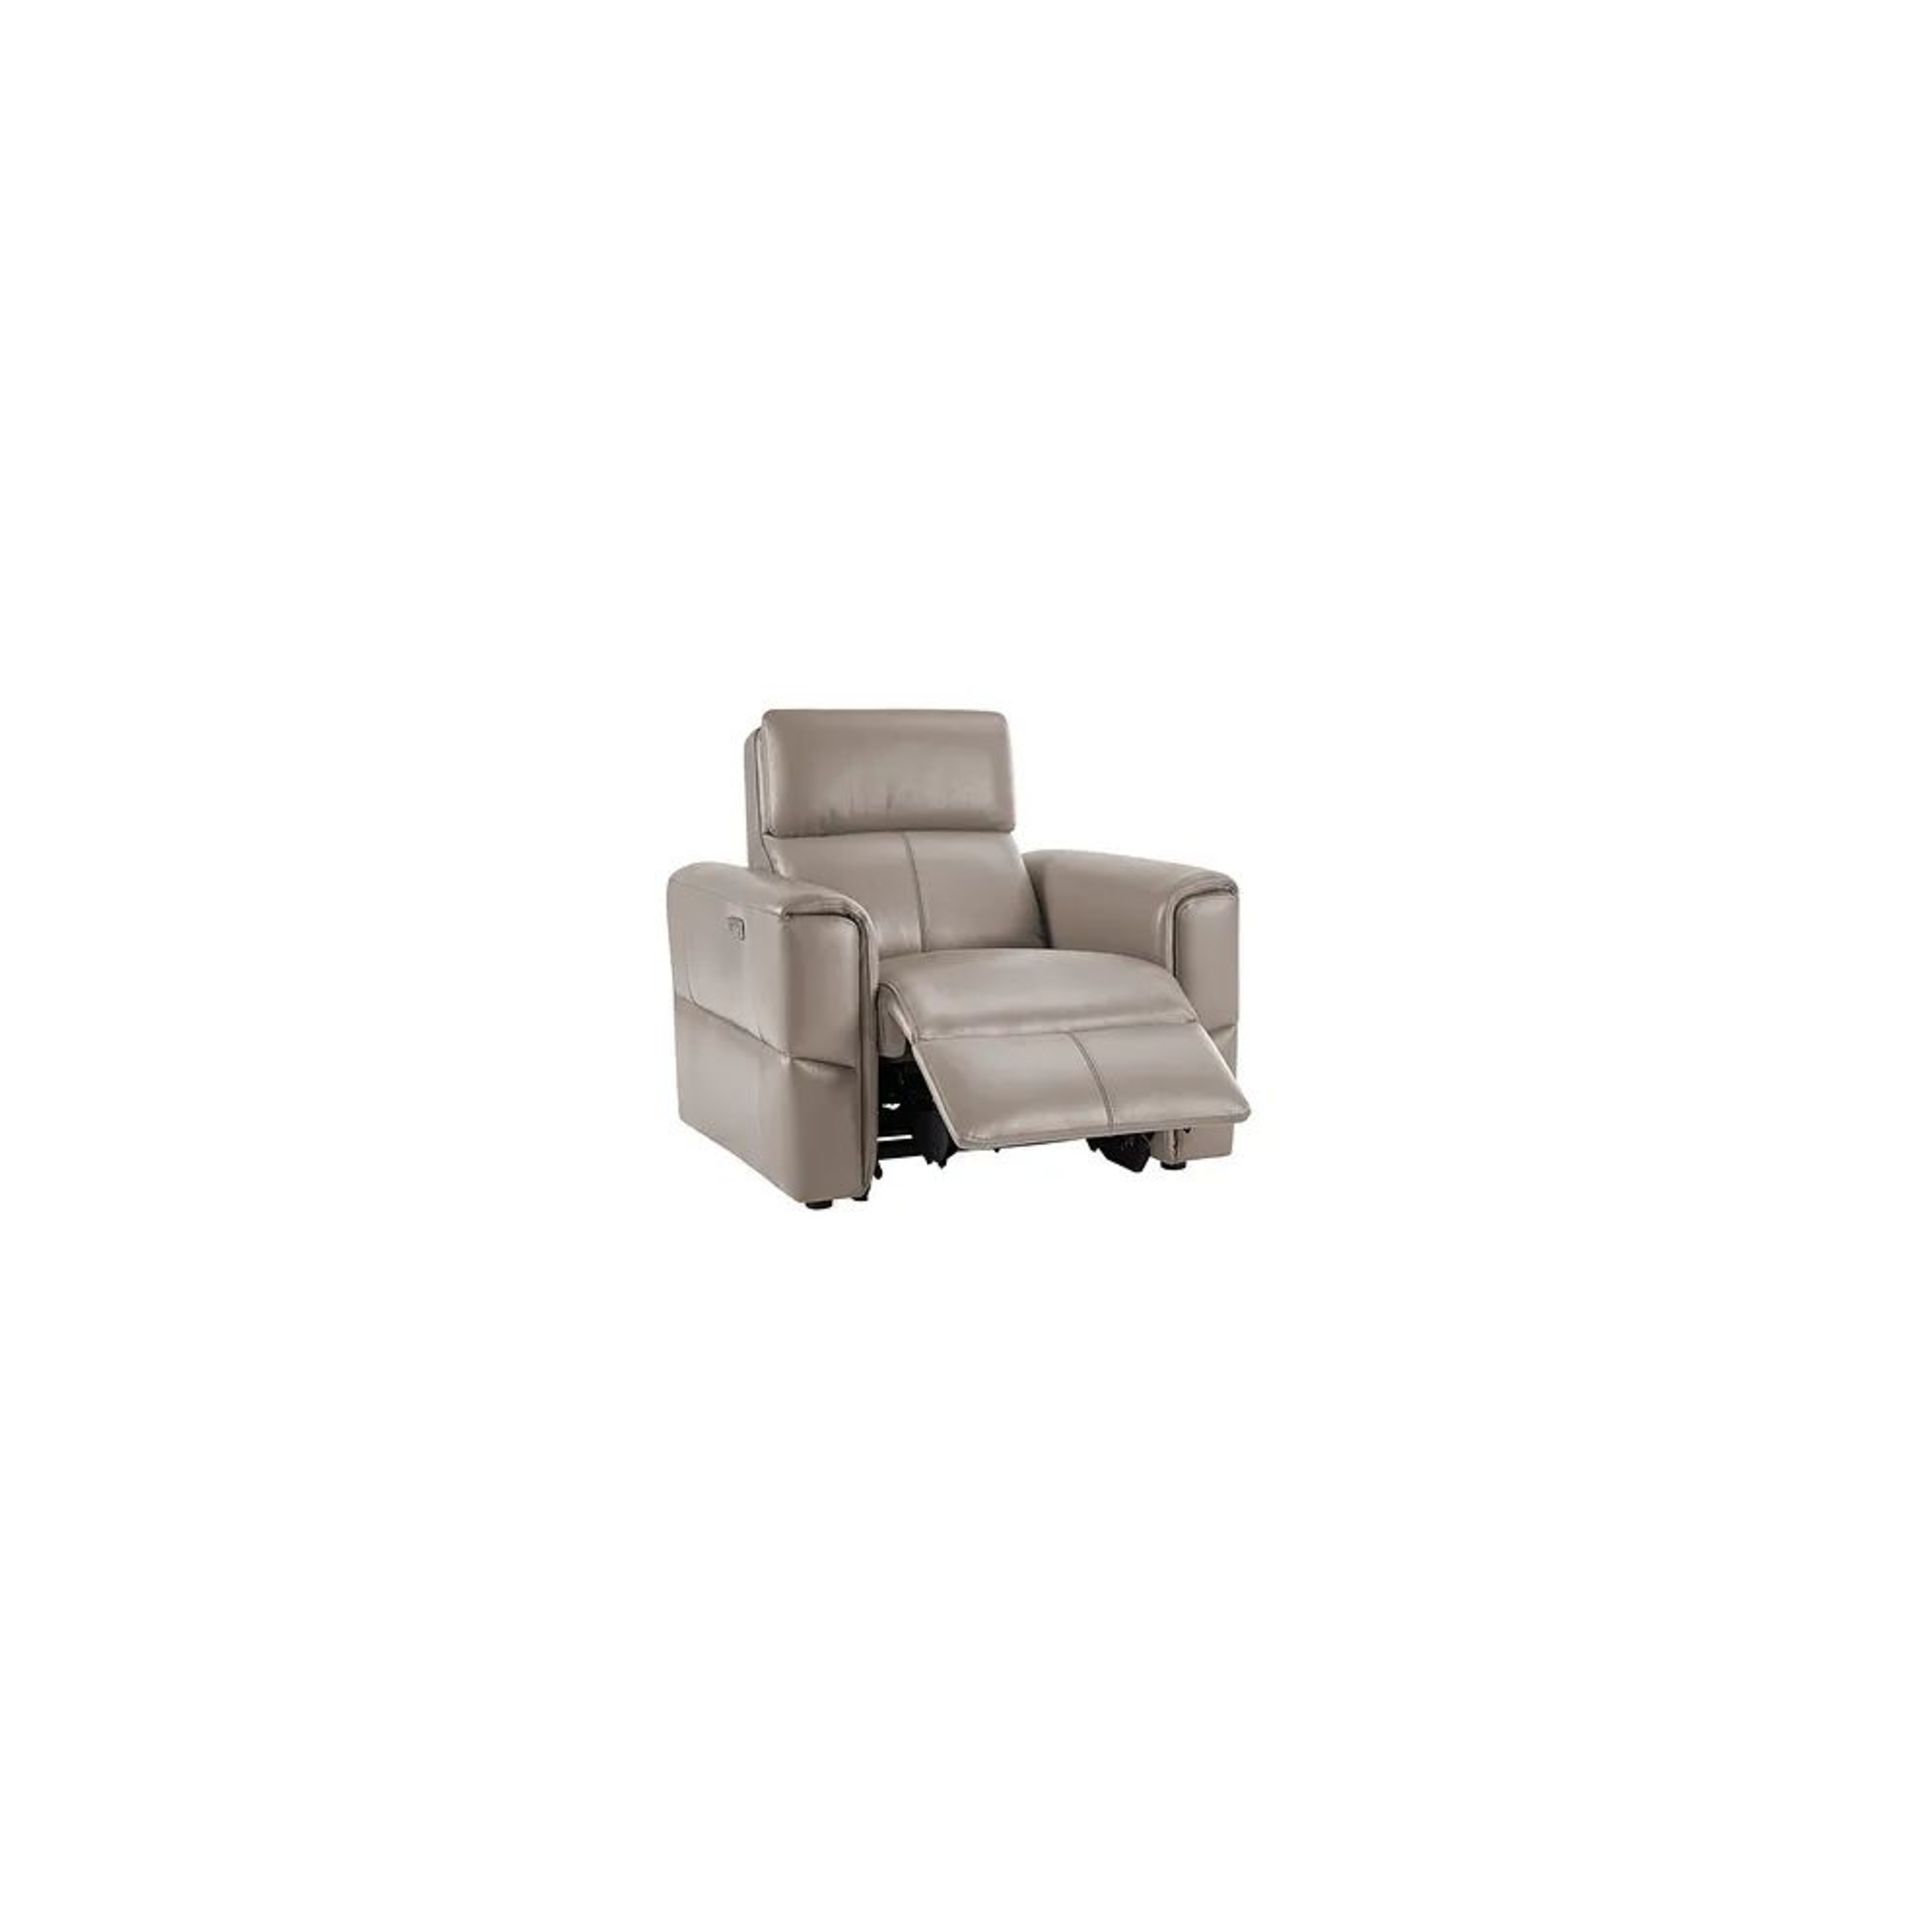 BRAND NEW SAMSON Electric Recliner Armchair - STONE LEATHER. RRP £1249. Showcasing neat, modern - Image 3 of 10